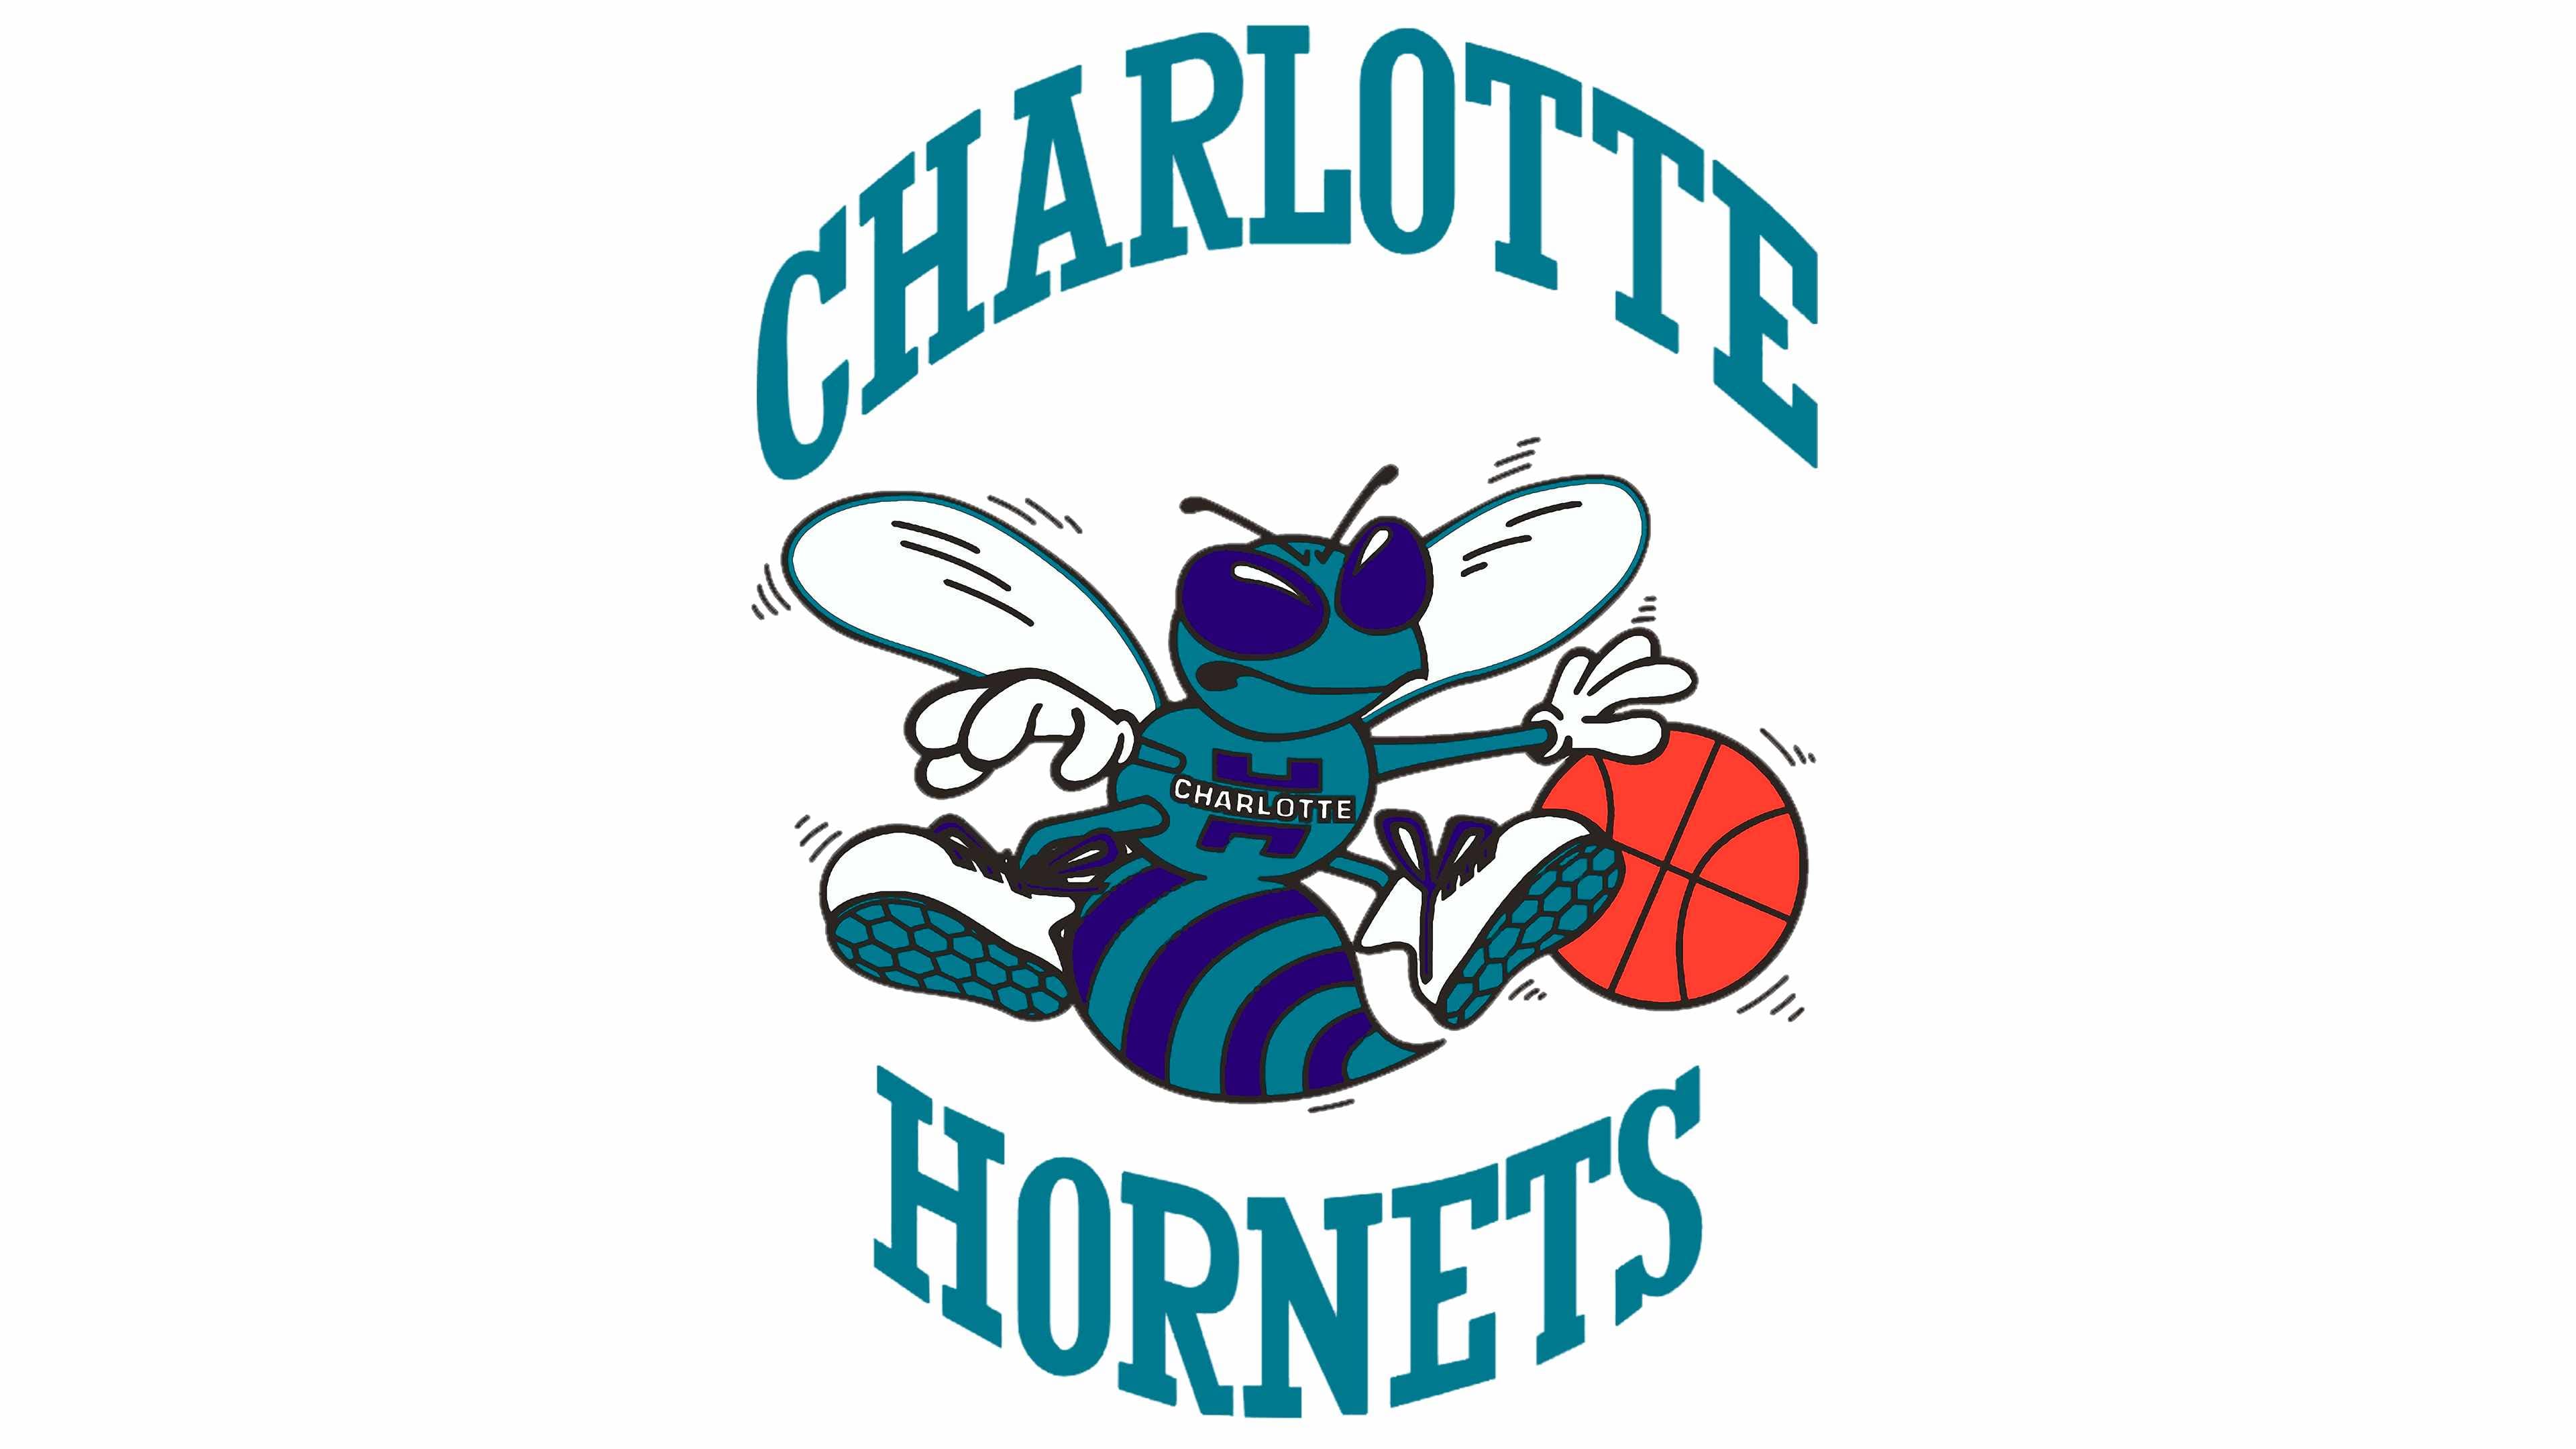 Graphic Language: The Bee's Knees: Charlotte Hornets 2014 Identity